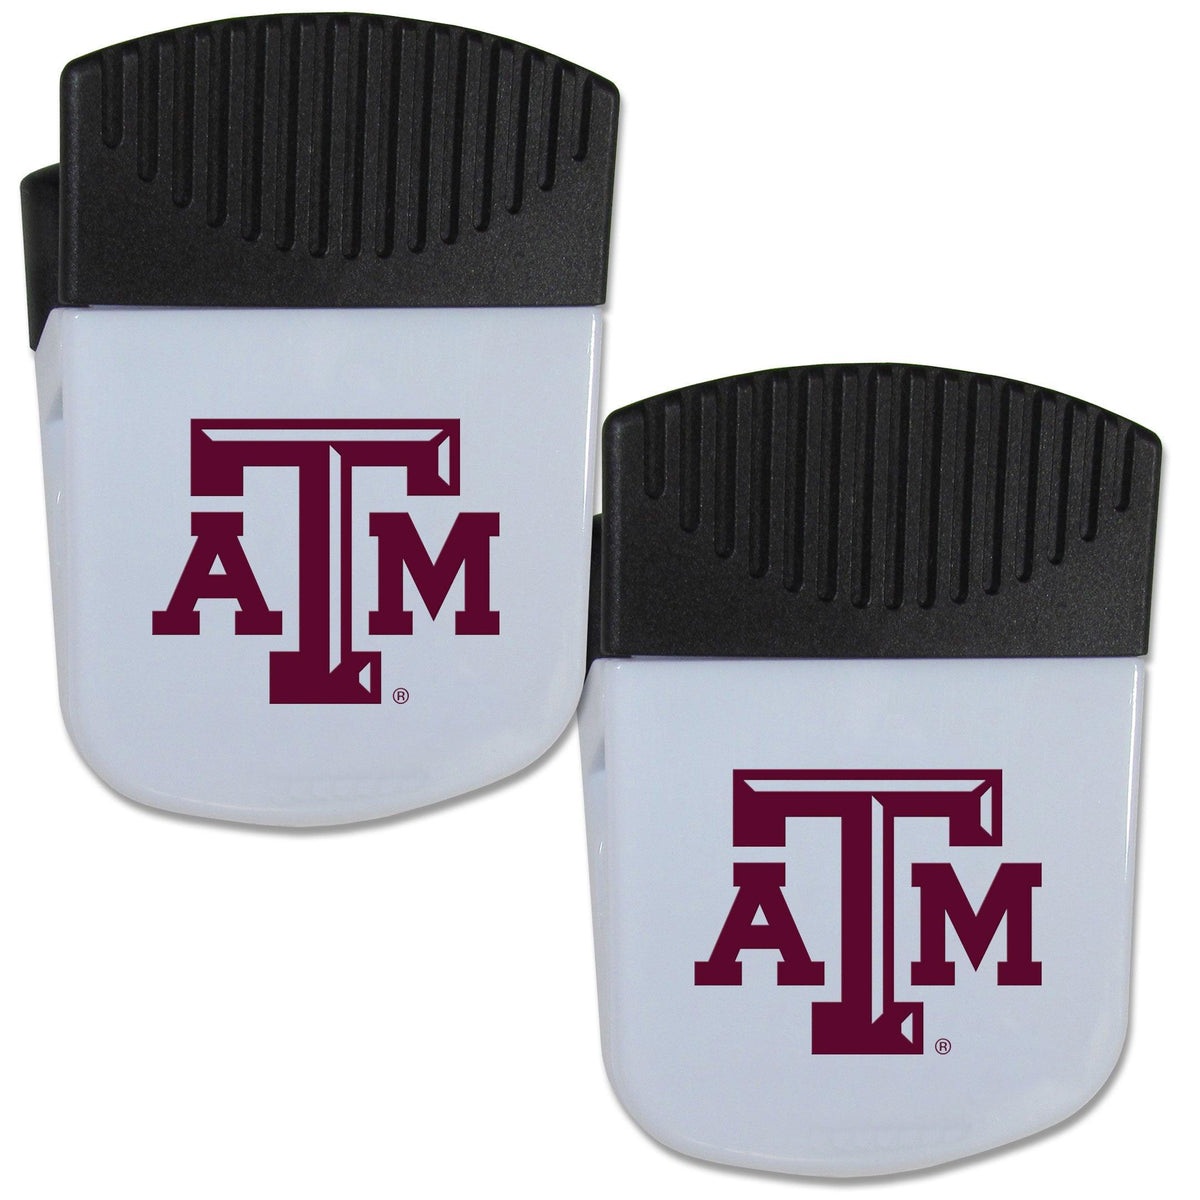 Texas A & M Aggies Chip Clip Magnet with Bottle Opener, 2 pack - Flyclothing LLC